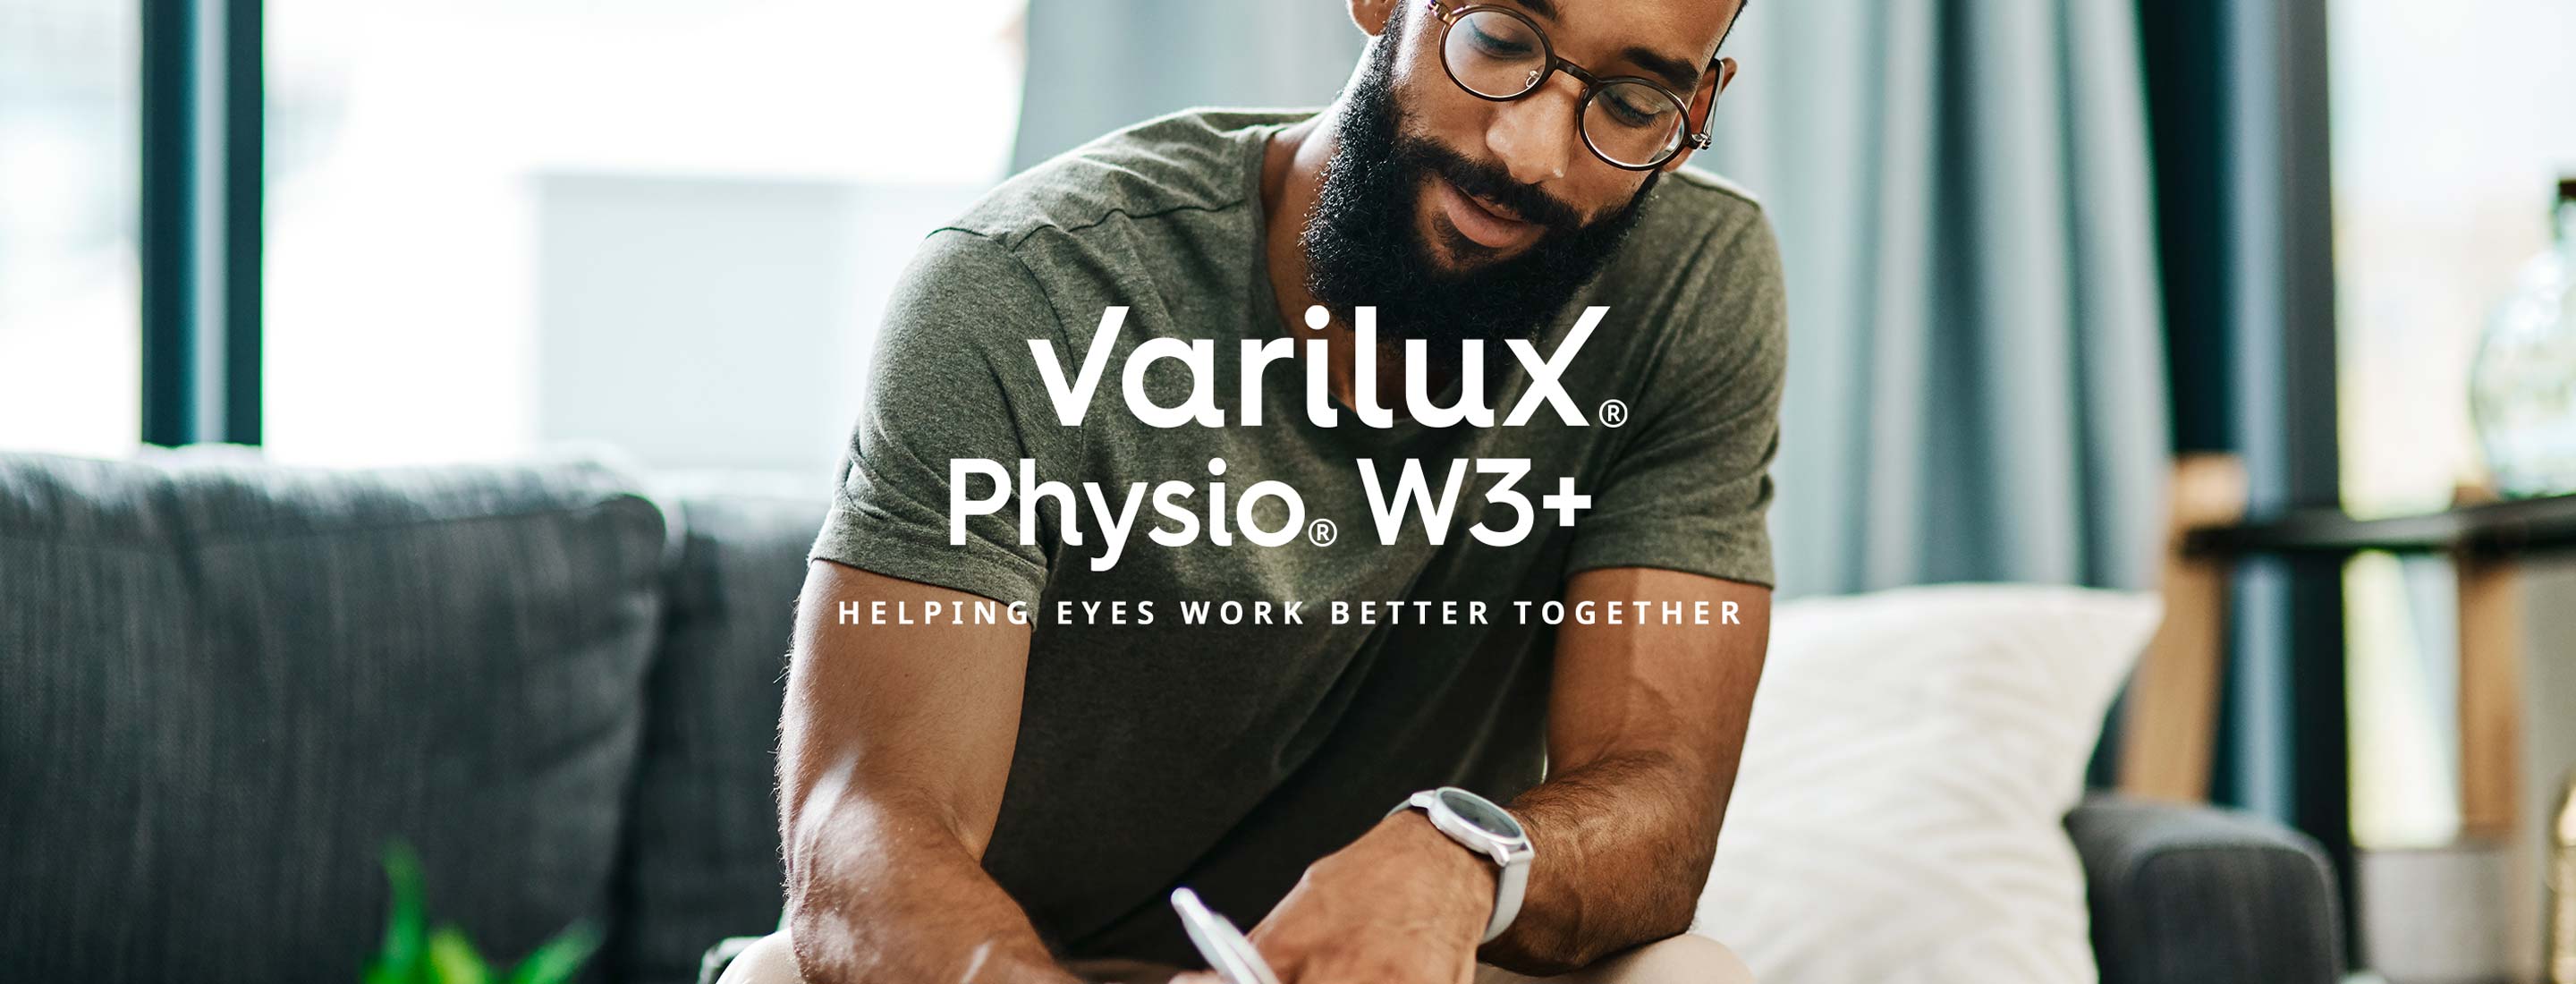 Varilux Physio W3+ - helping eyes work better together